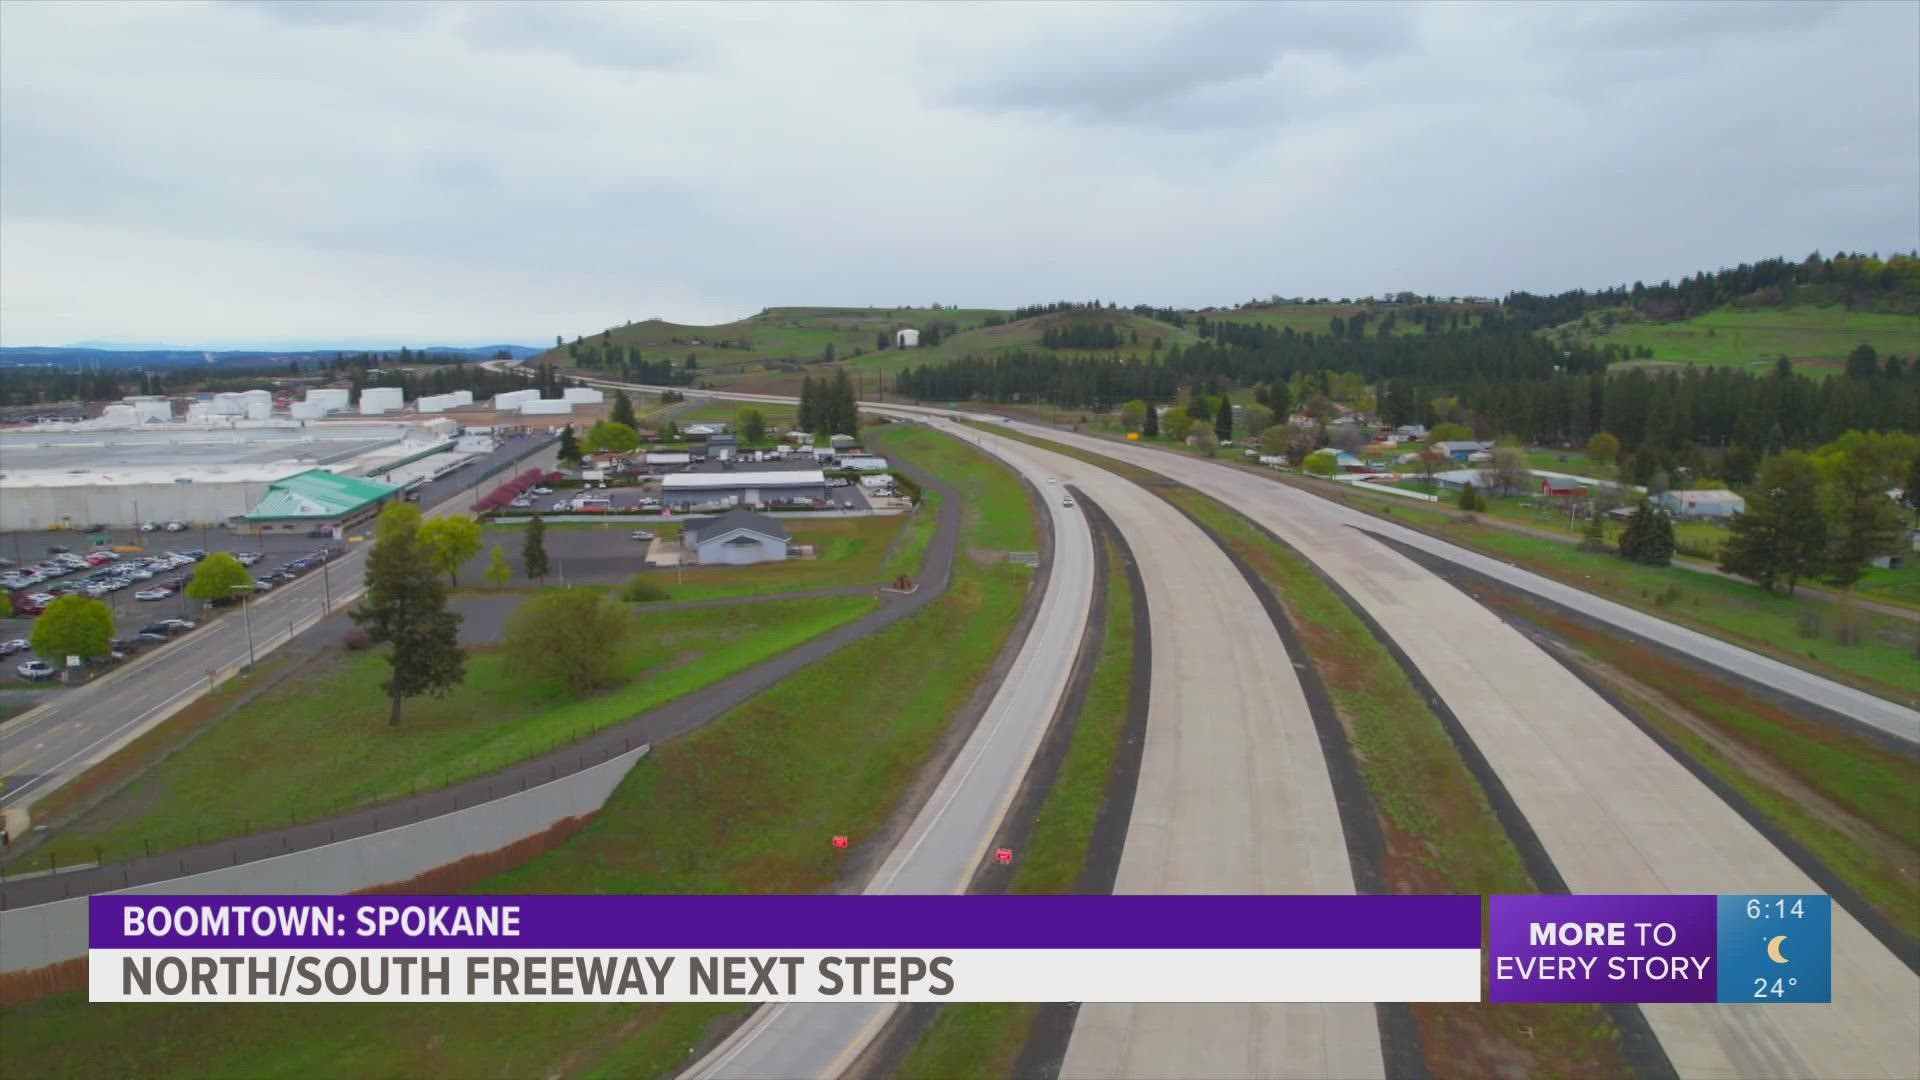 According to WSDOT, the freeway should be ready by 2028. That's the latest estimate at least.